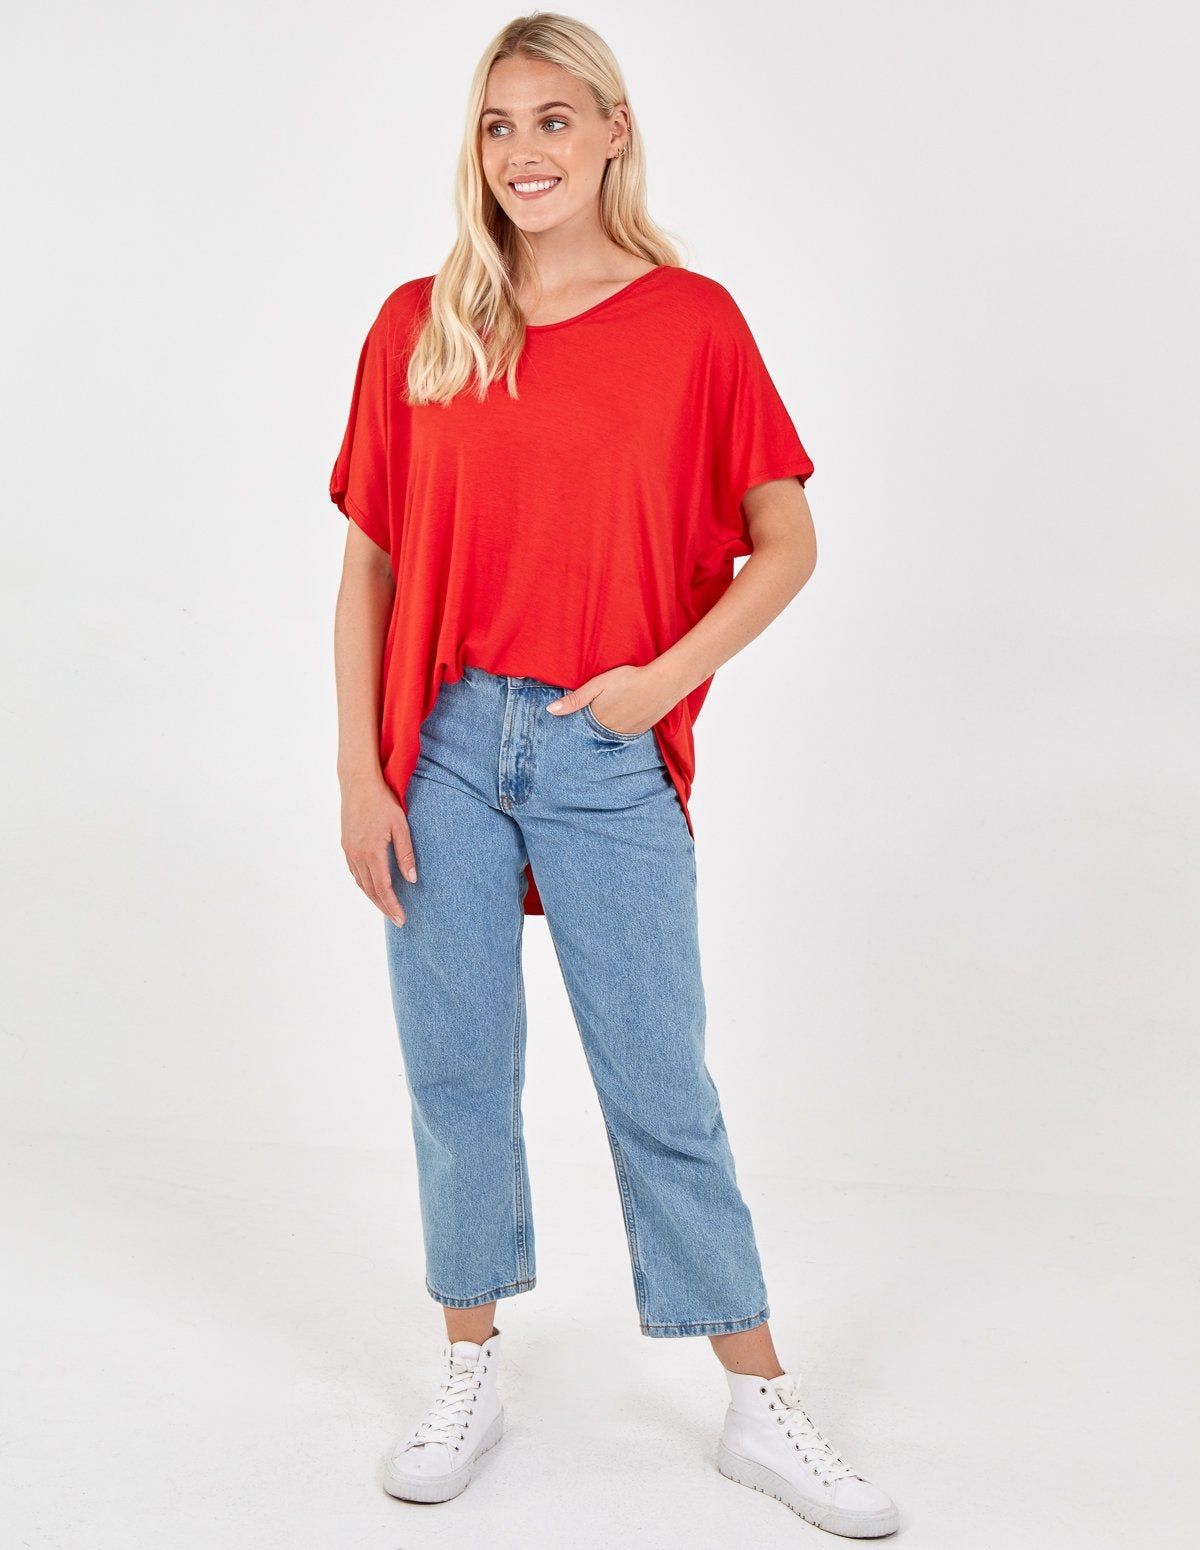 Keep it simple with this casual oversized top. Pair with jeans, chunky trainers and a headband for an easy day to night look!